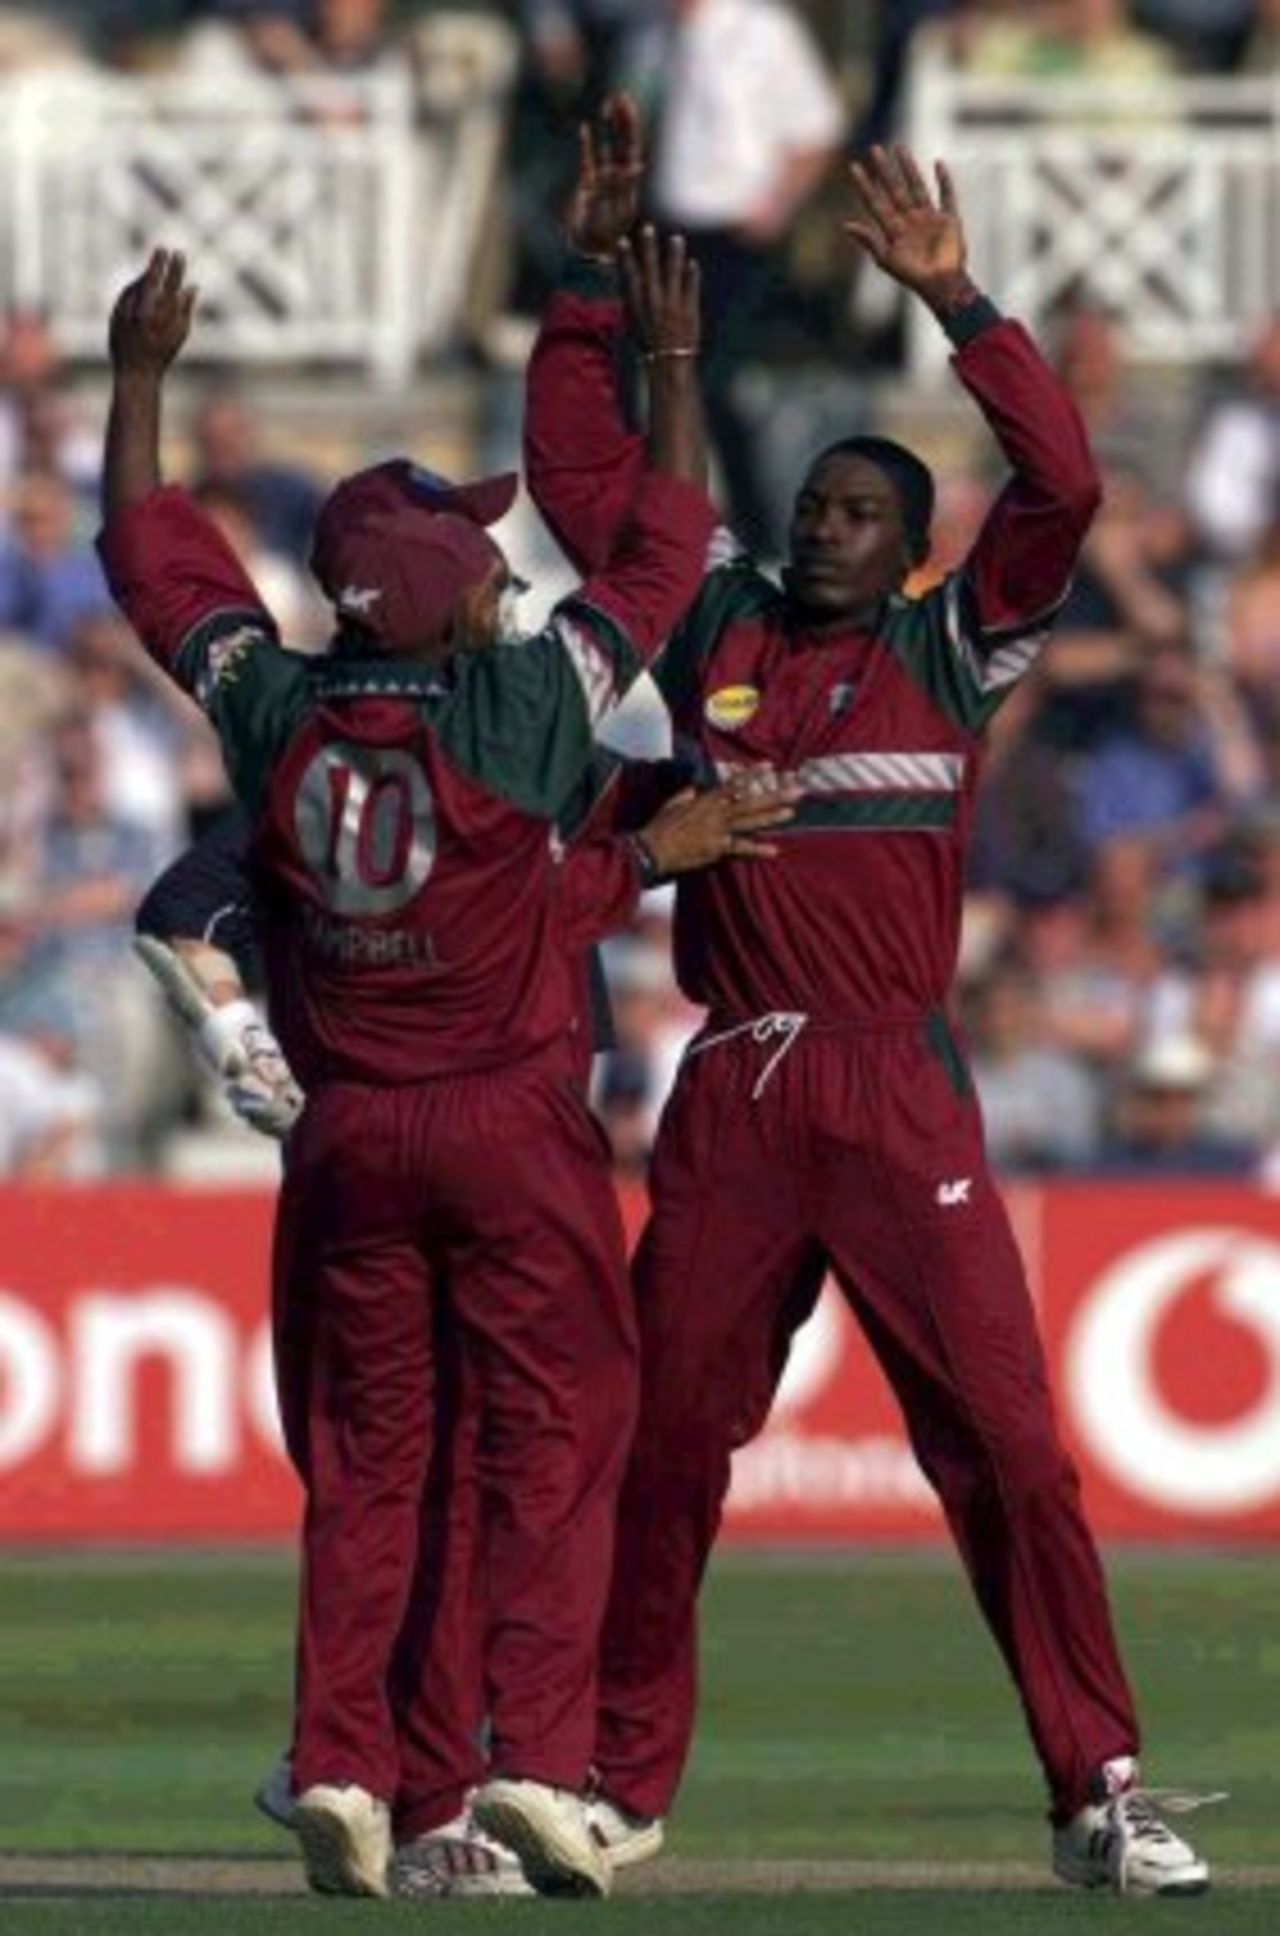 20 Jul 2000: Chris Gayle of the West Indies soaks up the praise after claiming the wicket of Darren Gough of England during the NatWest Series One Day International between England and West Indies at Trent Britdge in Nottingham.